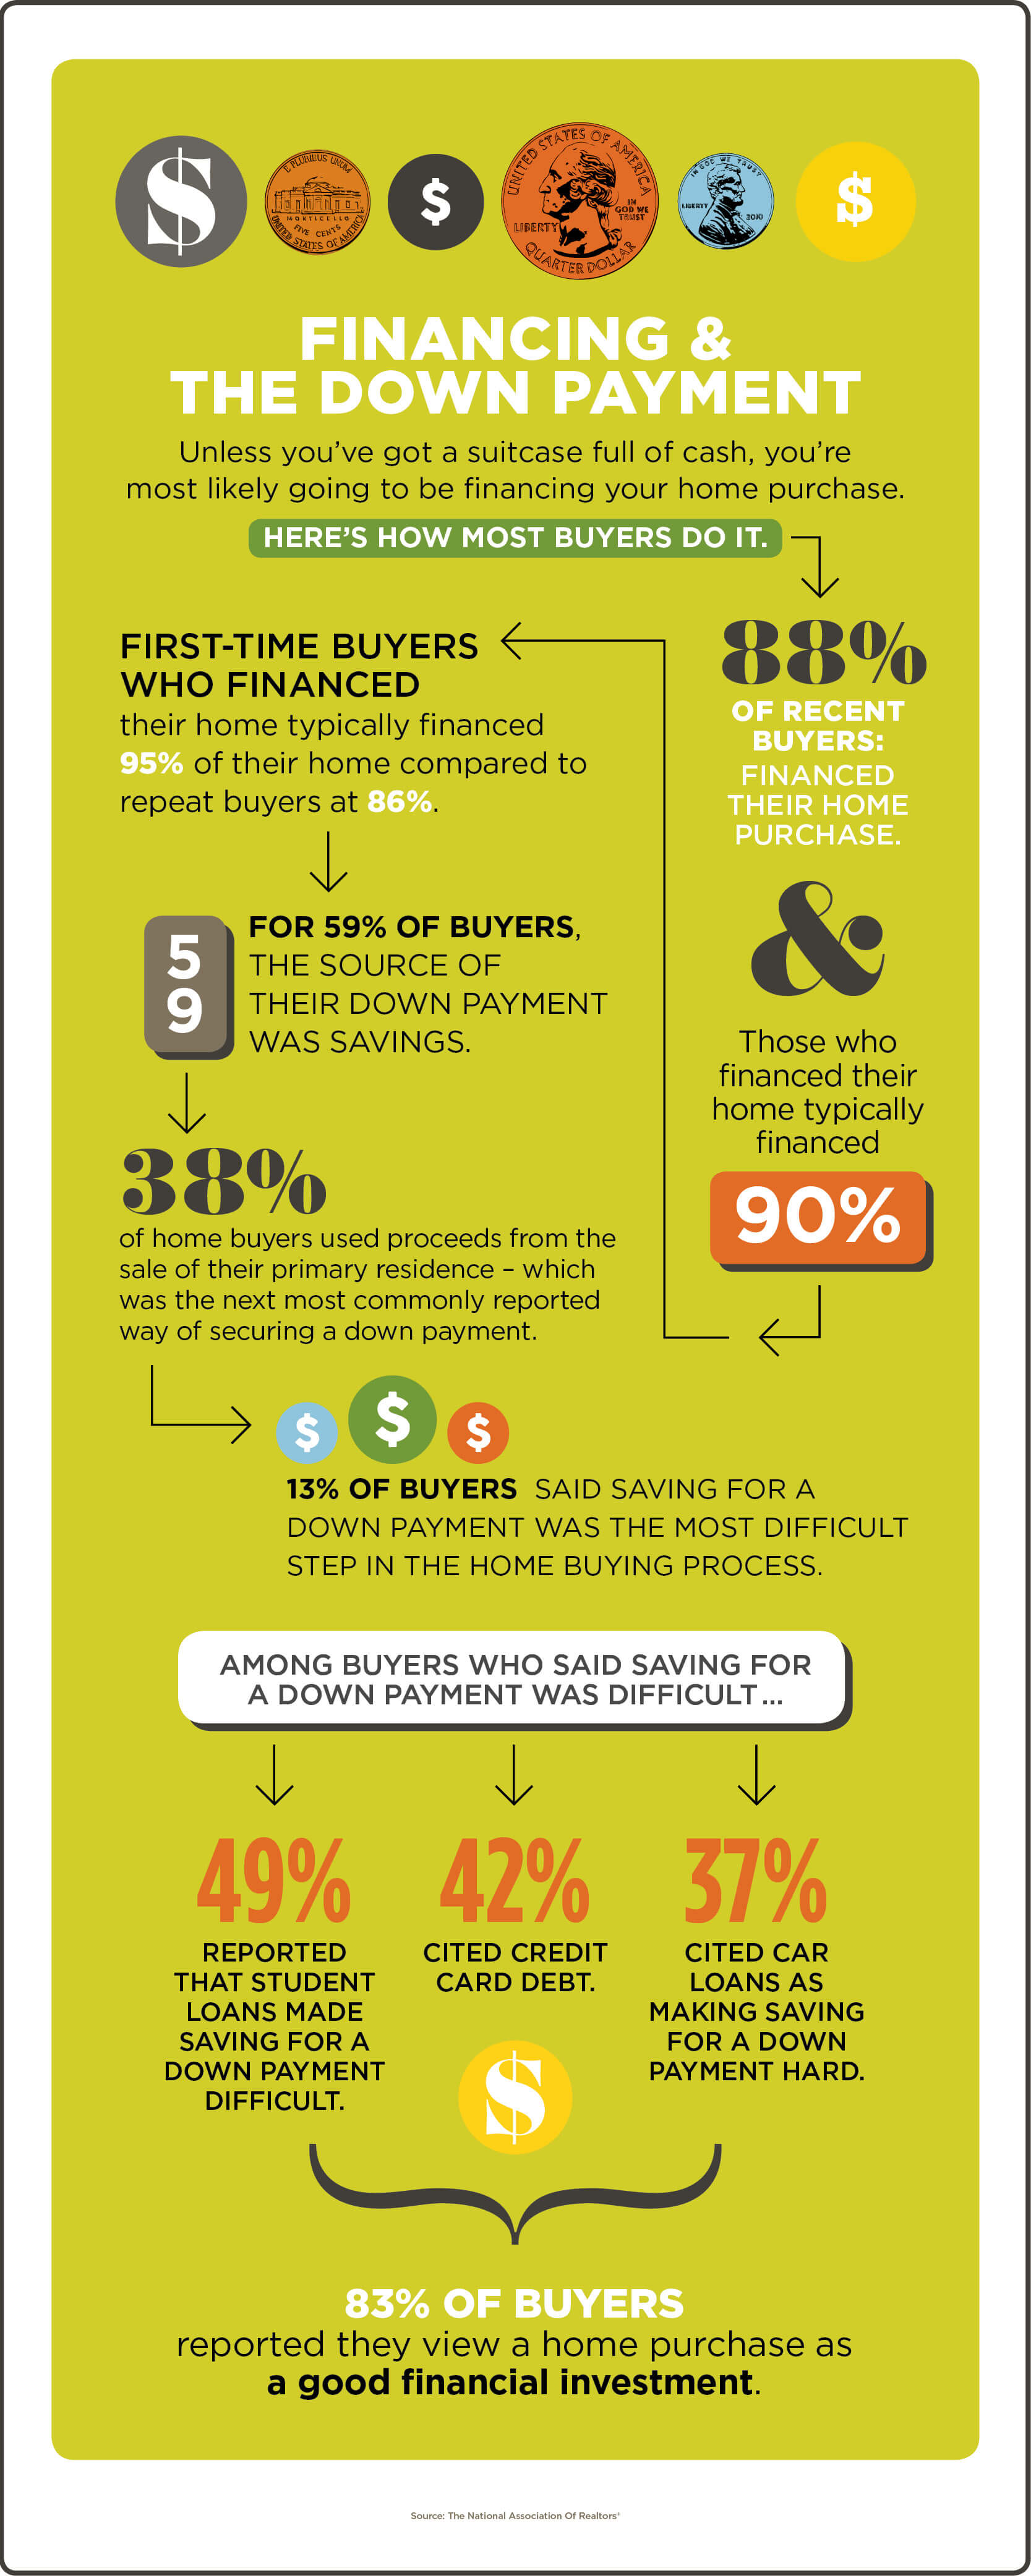 [Infographic] Financing & The Down Payment